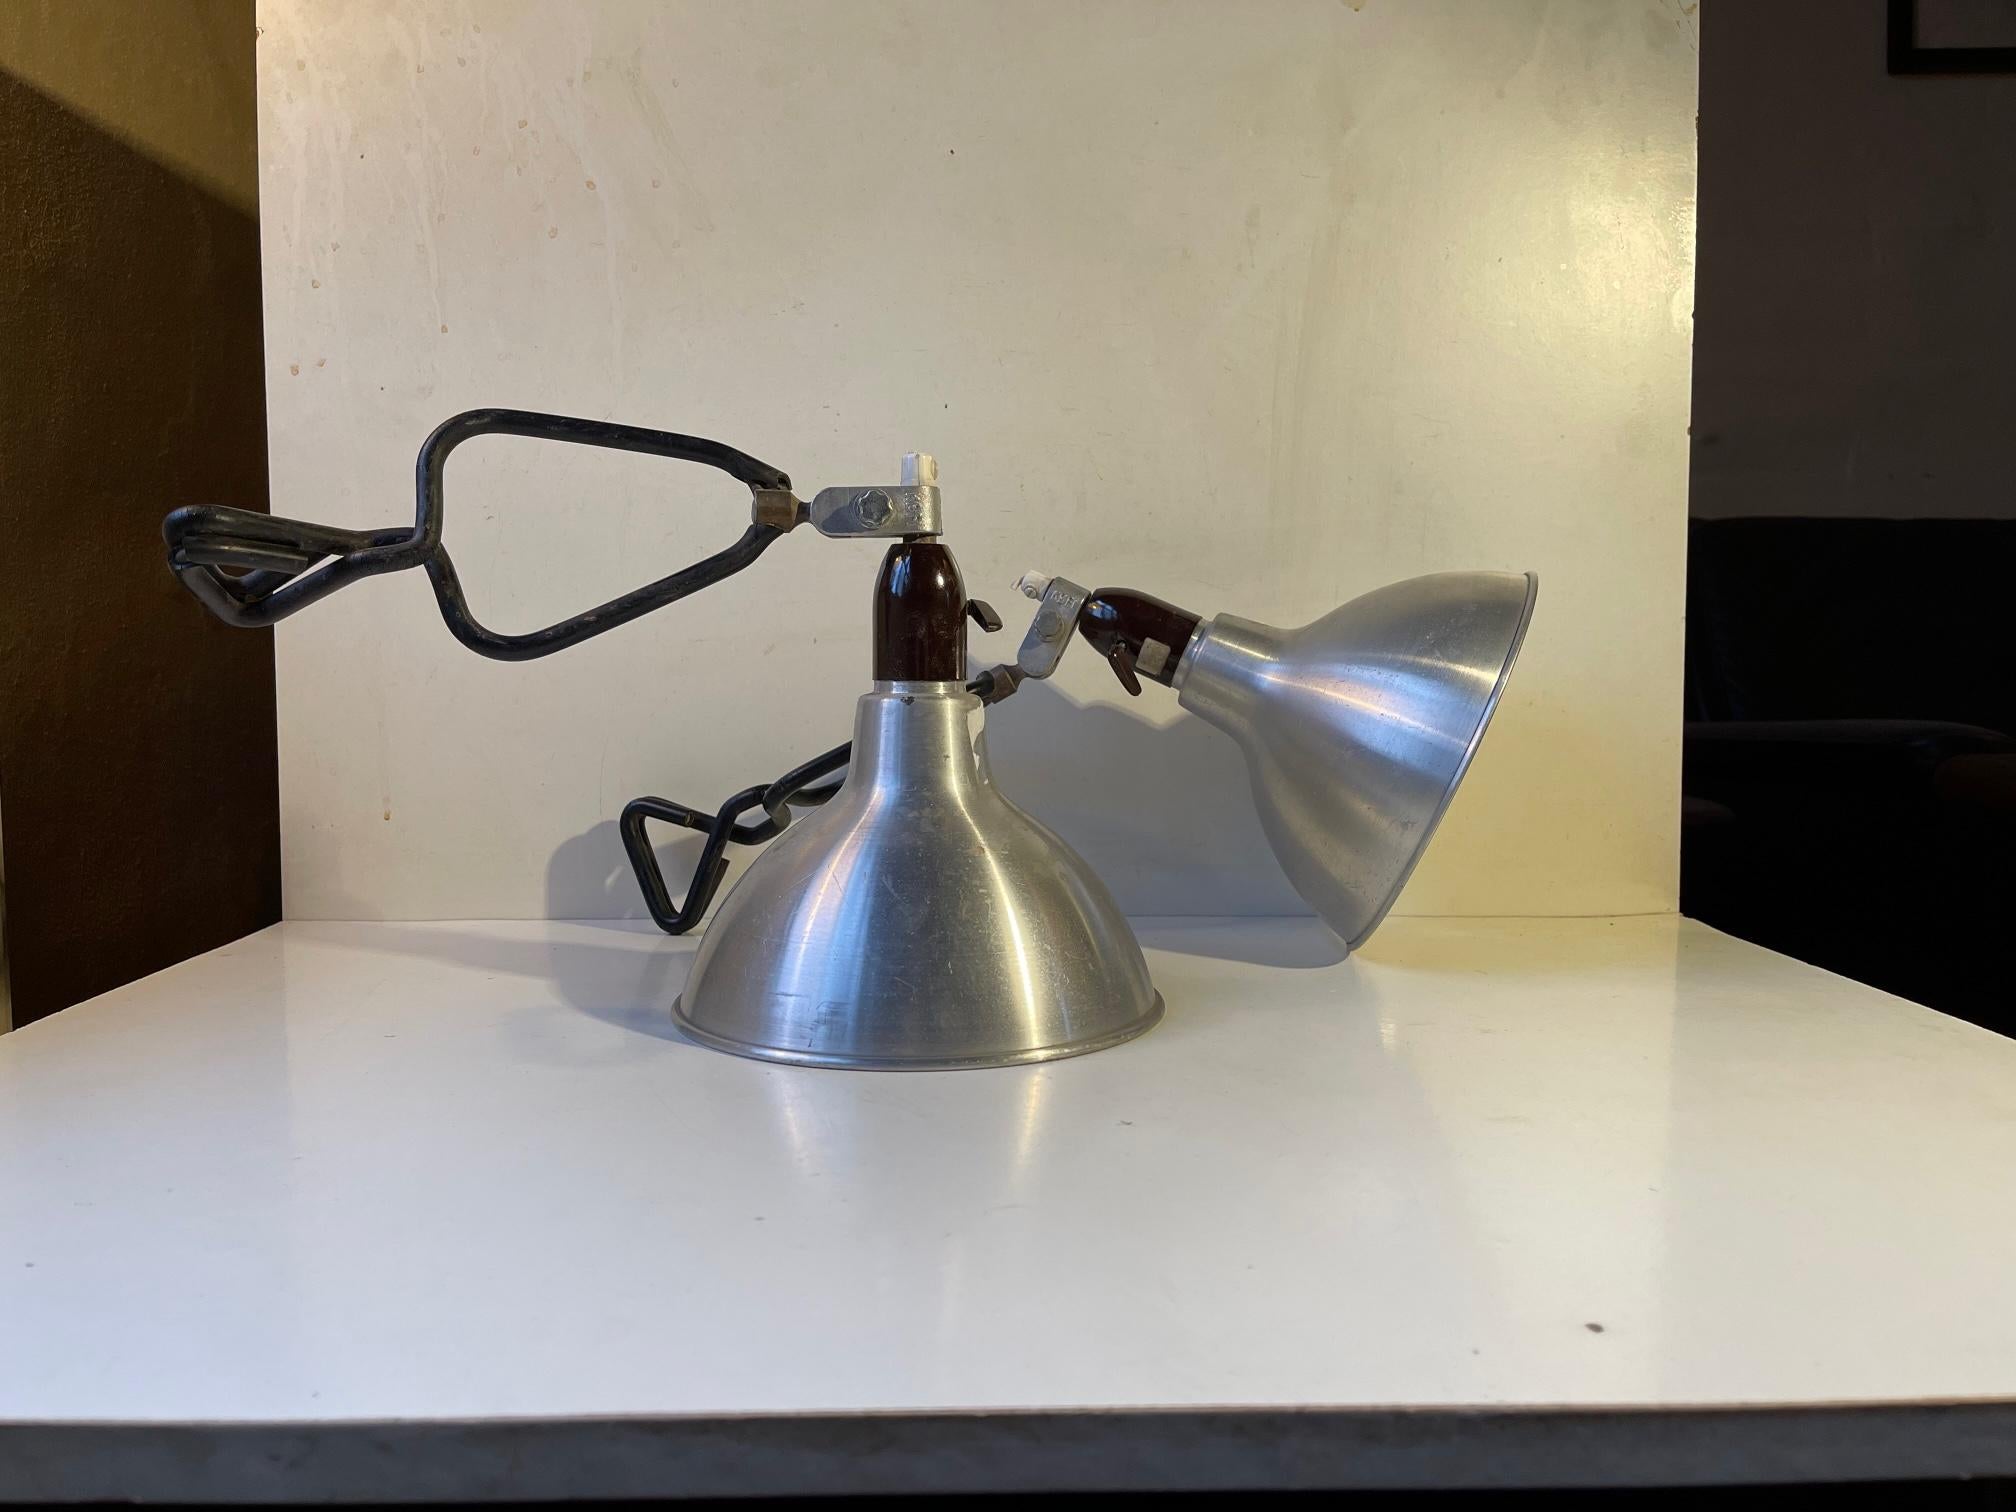 A pair of versatile and multi-adjustable clamp sconces. Manufactured by Køfi design in Denmark during the 1950s or 60s. This particular set came out from a closed Motorcycle repair shop that operated from the 1940s to the 1990s on the west coast of